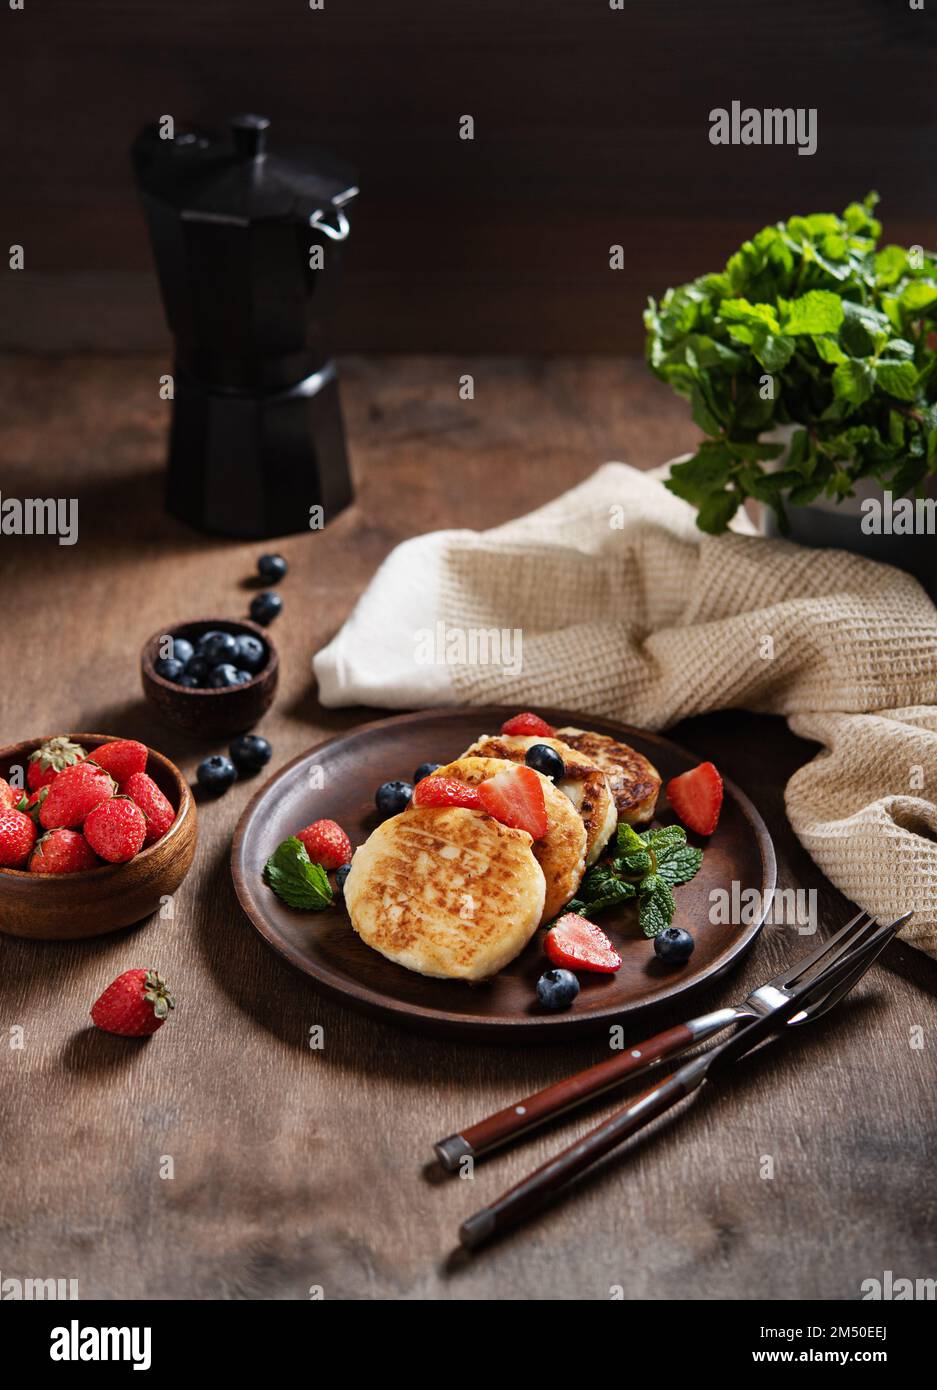 Cottage cheese pancakes or syrniki  with mint, strawberries and blueberries on a dark wooden table with a black coffee pot. Concept dark and moody hea Stock Photo